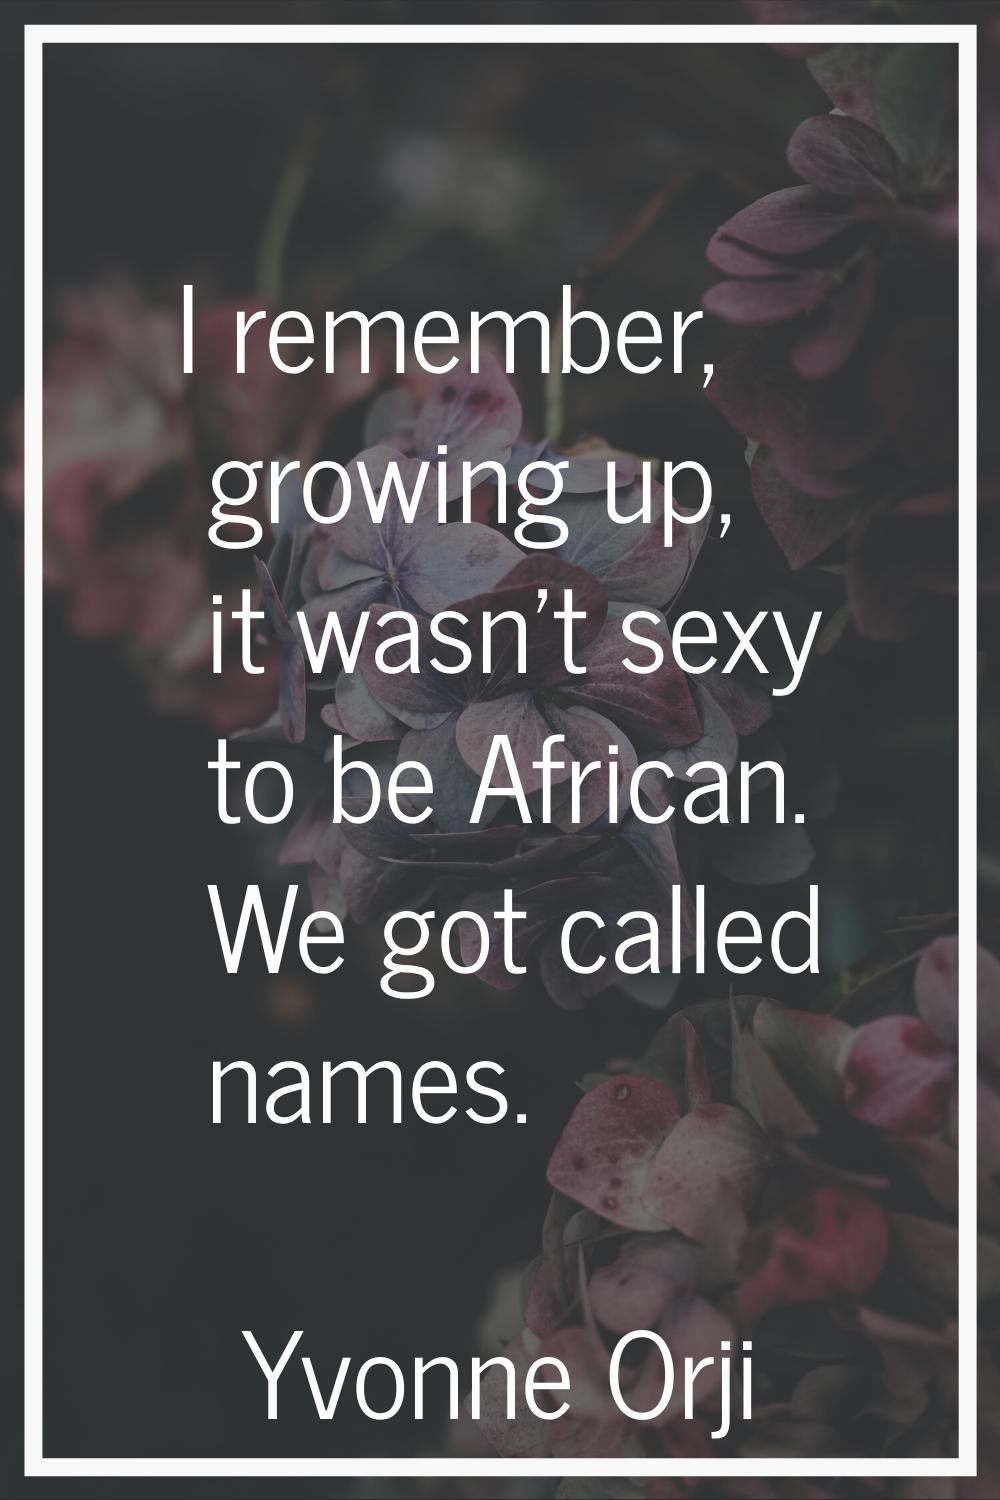 I remember, growing up, it wasn't sexy to be African. We got called names.